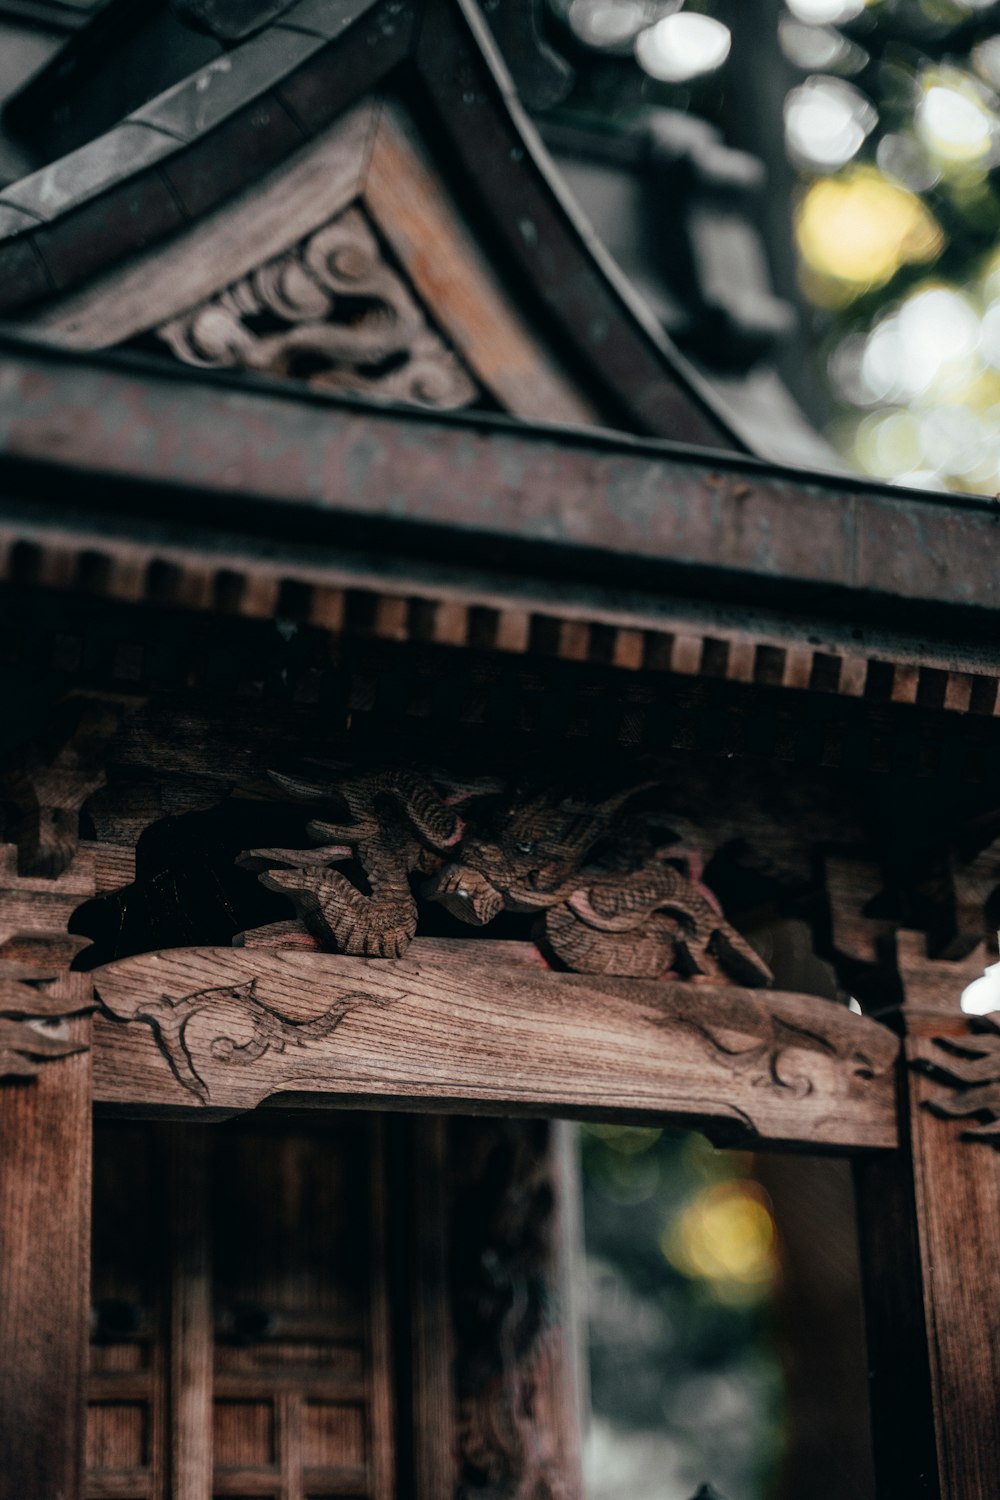 a close up of a wooden structure with carvings on it